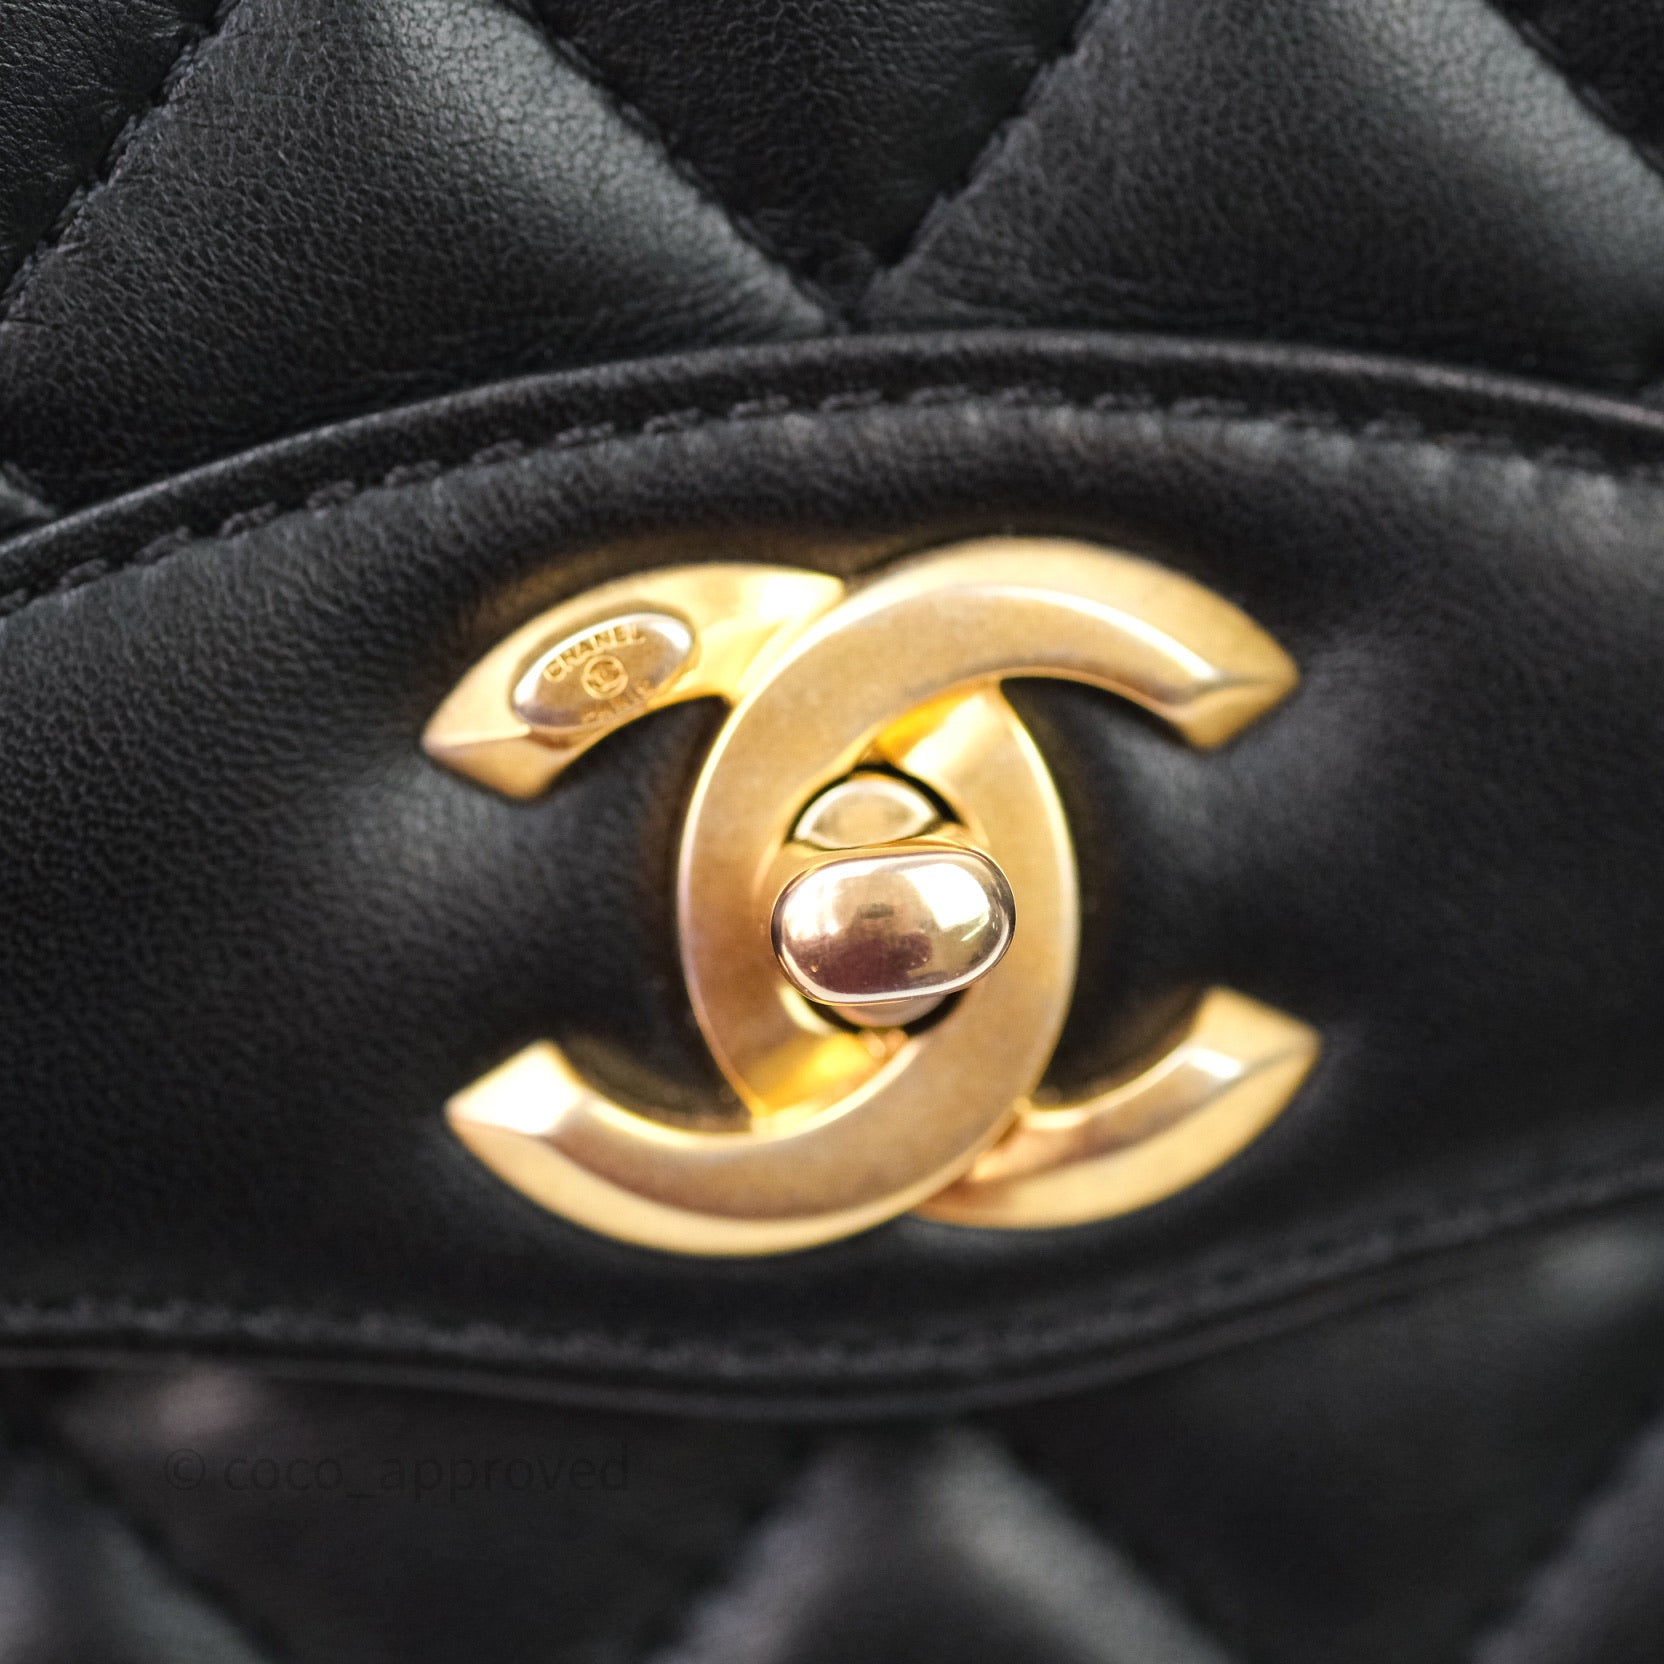 Chanel Vintage Bags  CLASSIC COCO – Classic Coco Authentic Vintage Luxury